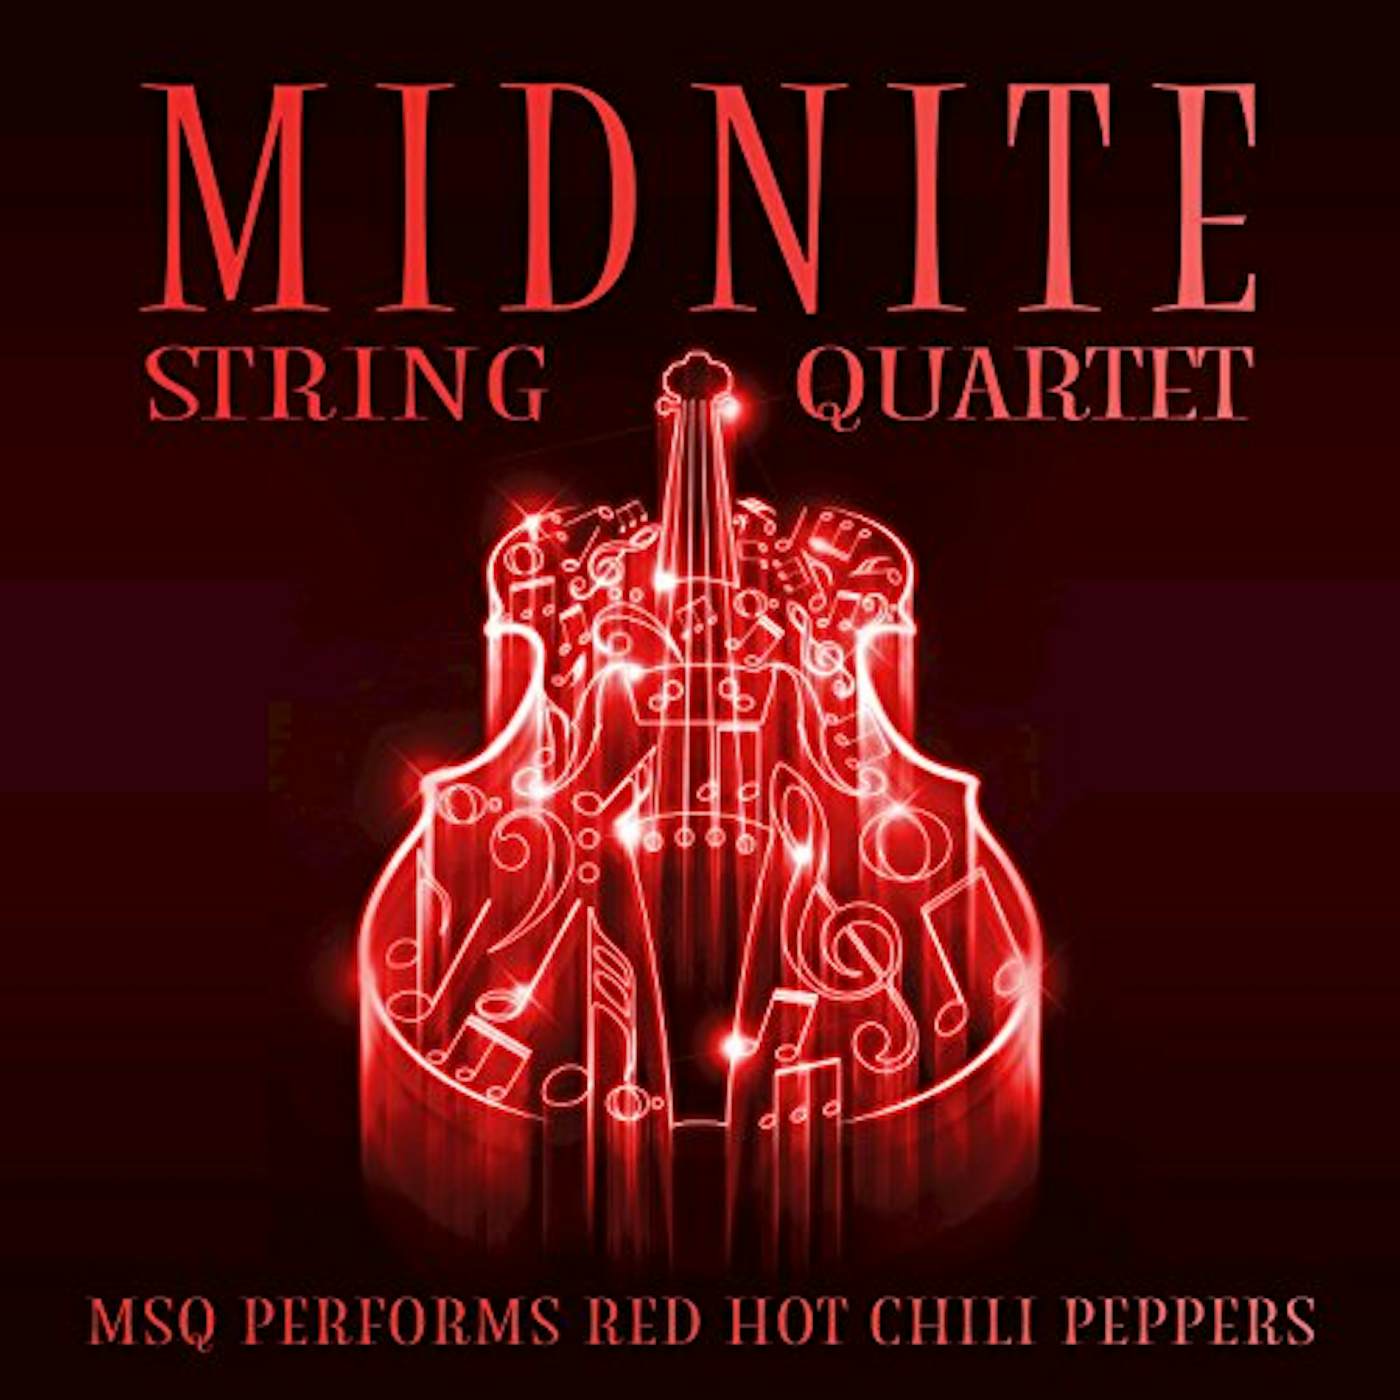 Midnite String Quartet MSQ PERFORMS RED HOT CHILI PEPPERS (MOD) CD